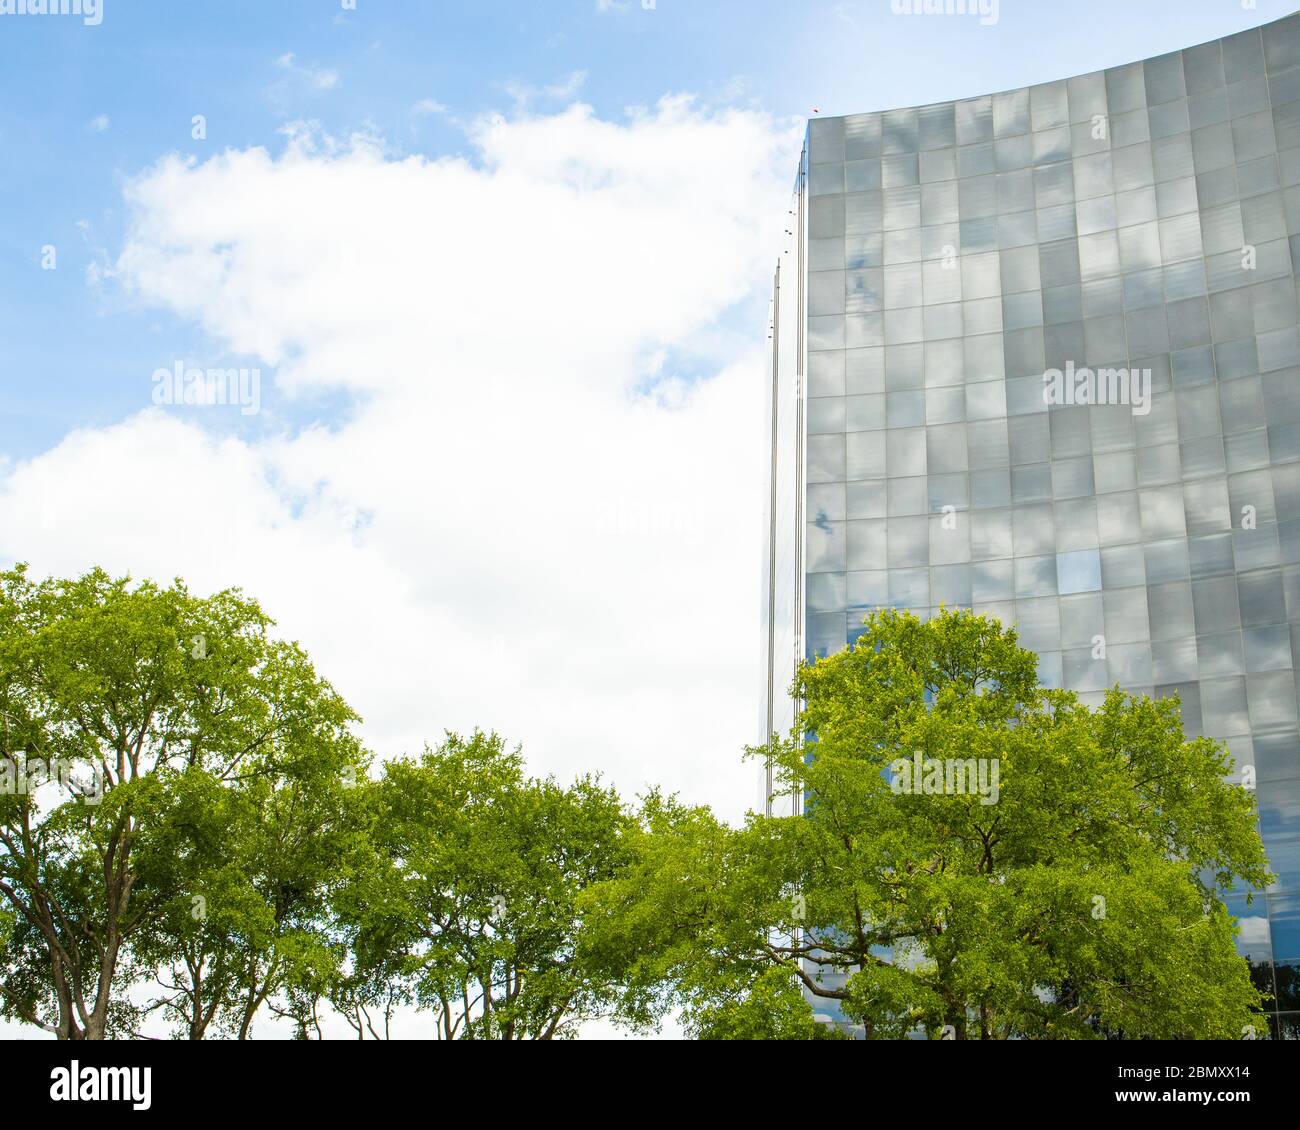 Tall modern office tower illustrates a contemporary workplace in Texas Stock Photo